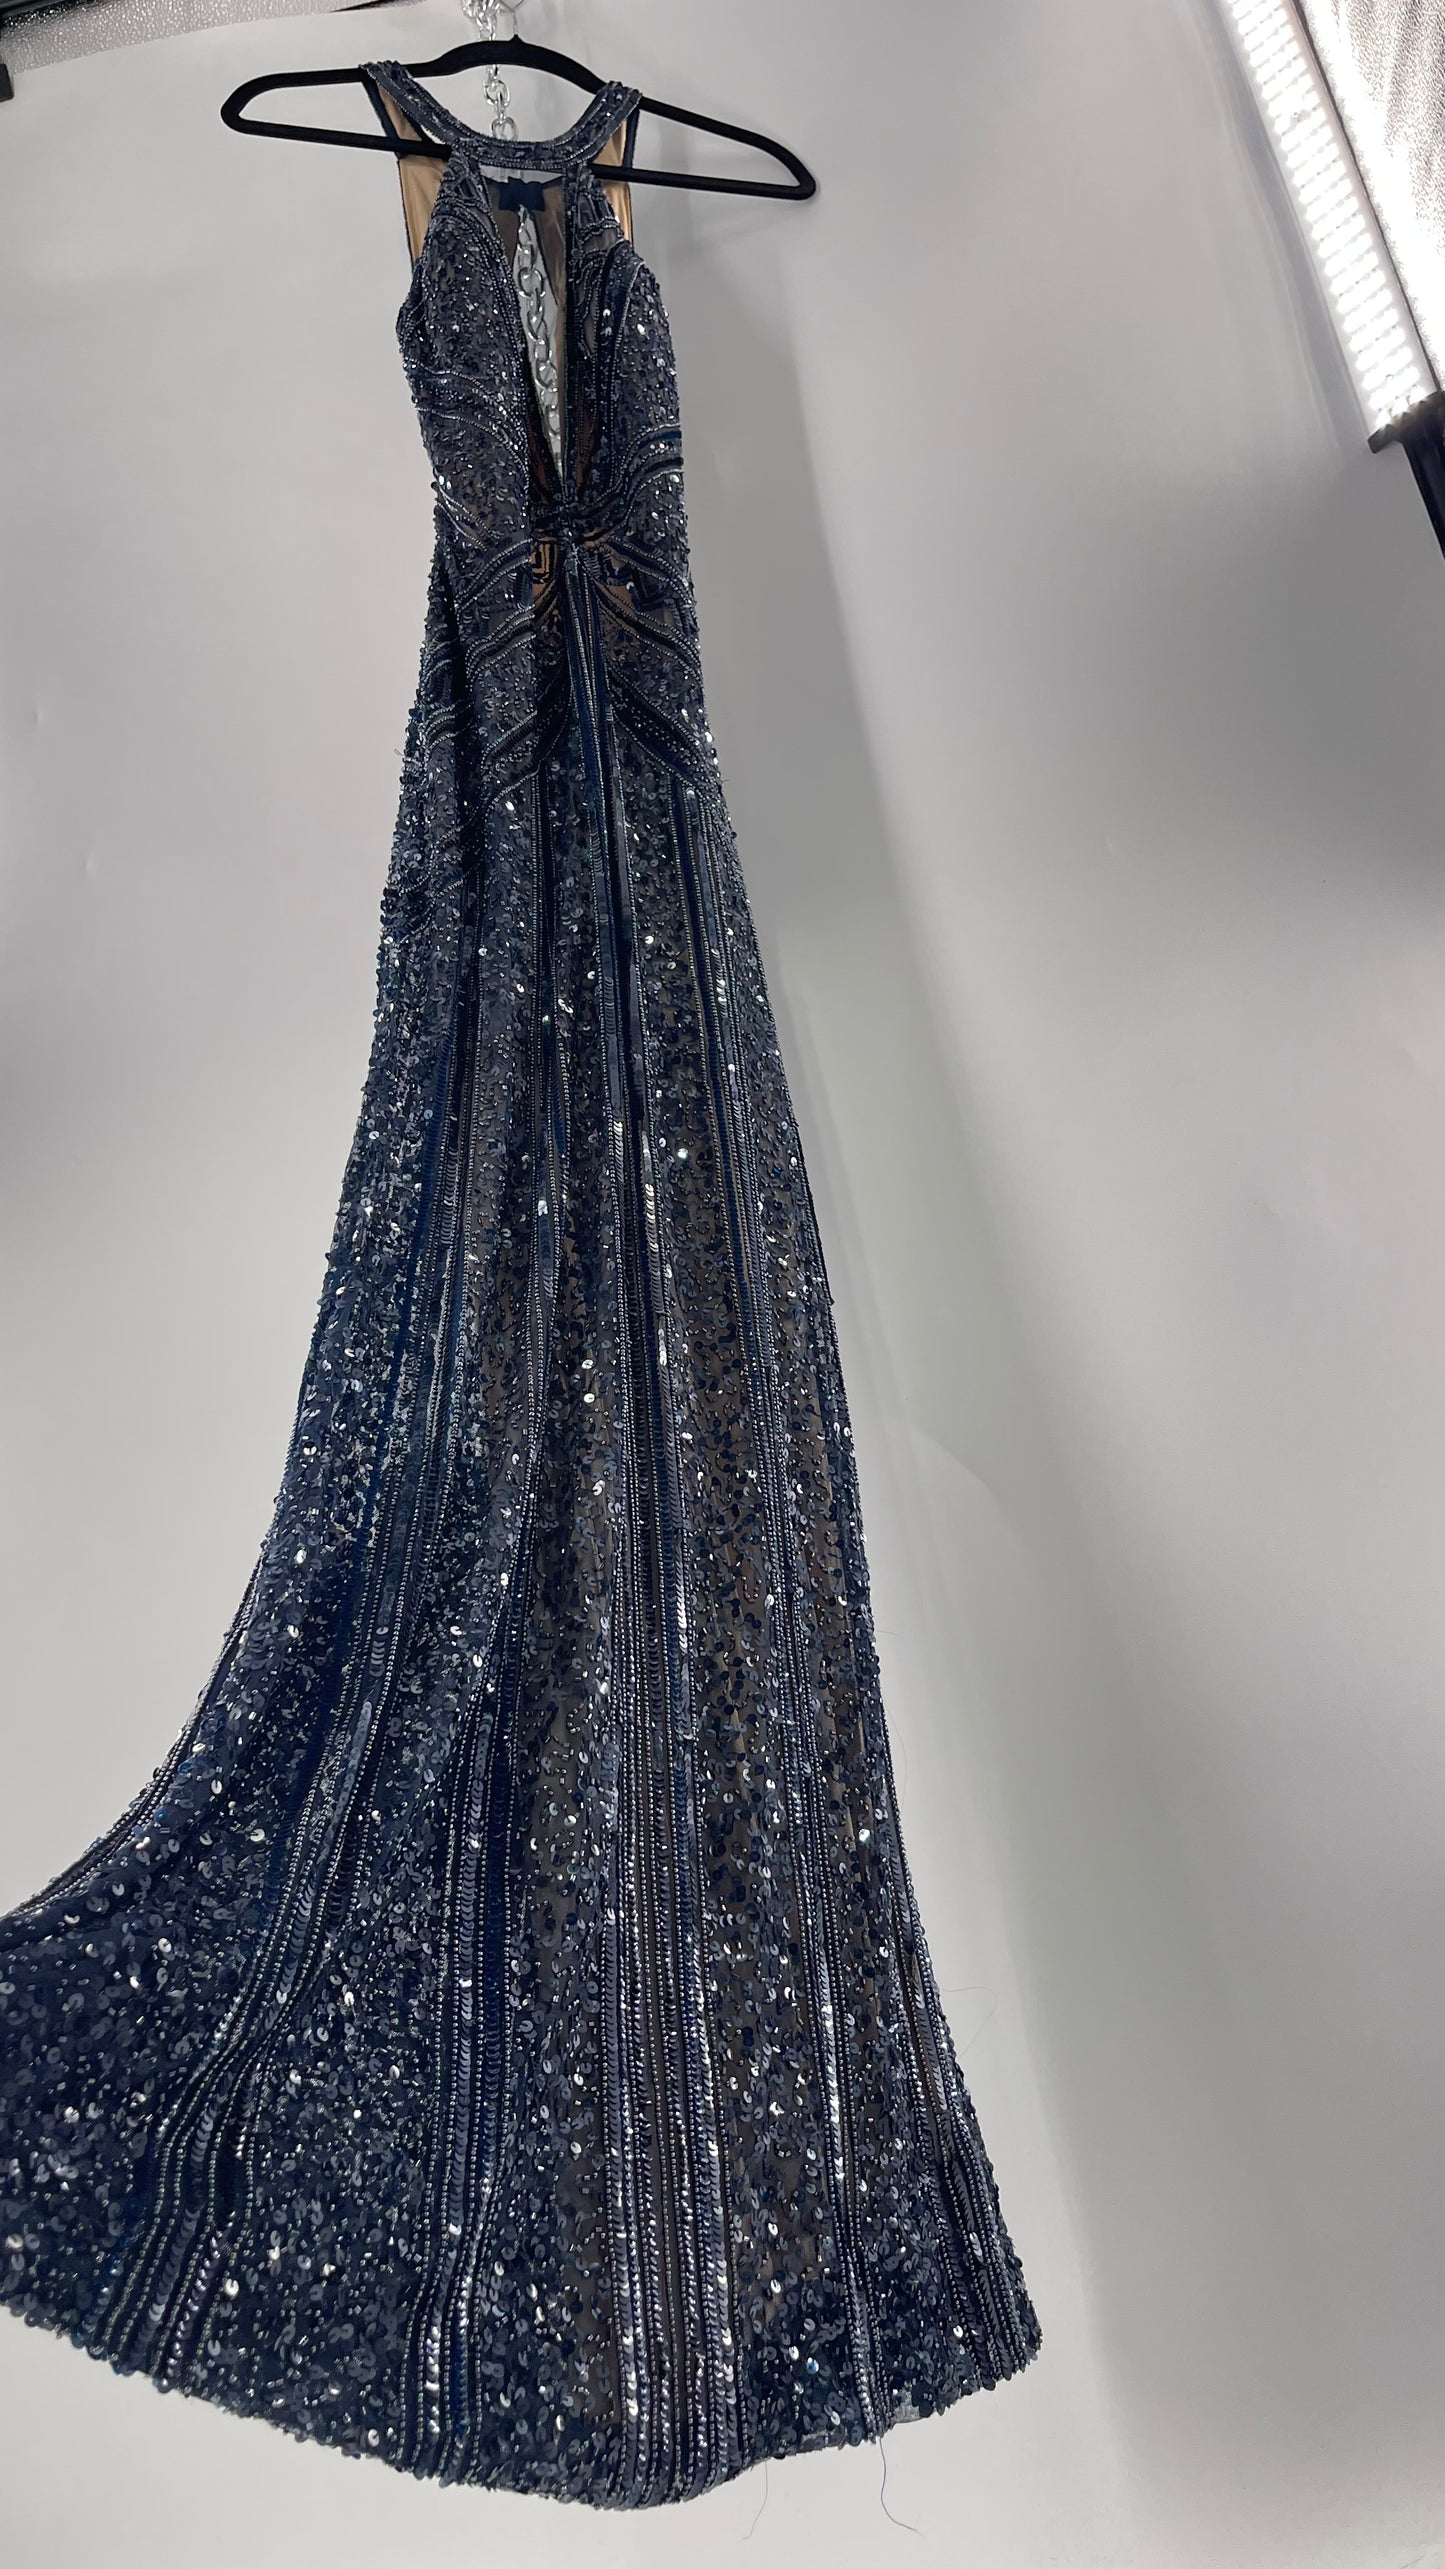 Vintage SCALA Navy Blue Beaded Floor Length Gown with Plunging Neckline, Backless Detail, and Tan Underlay (C)(4)